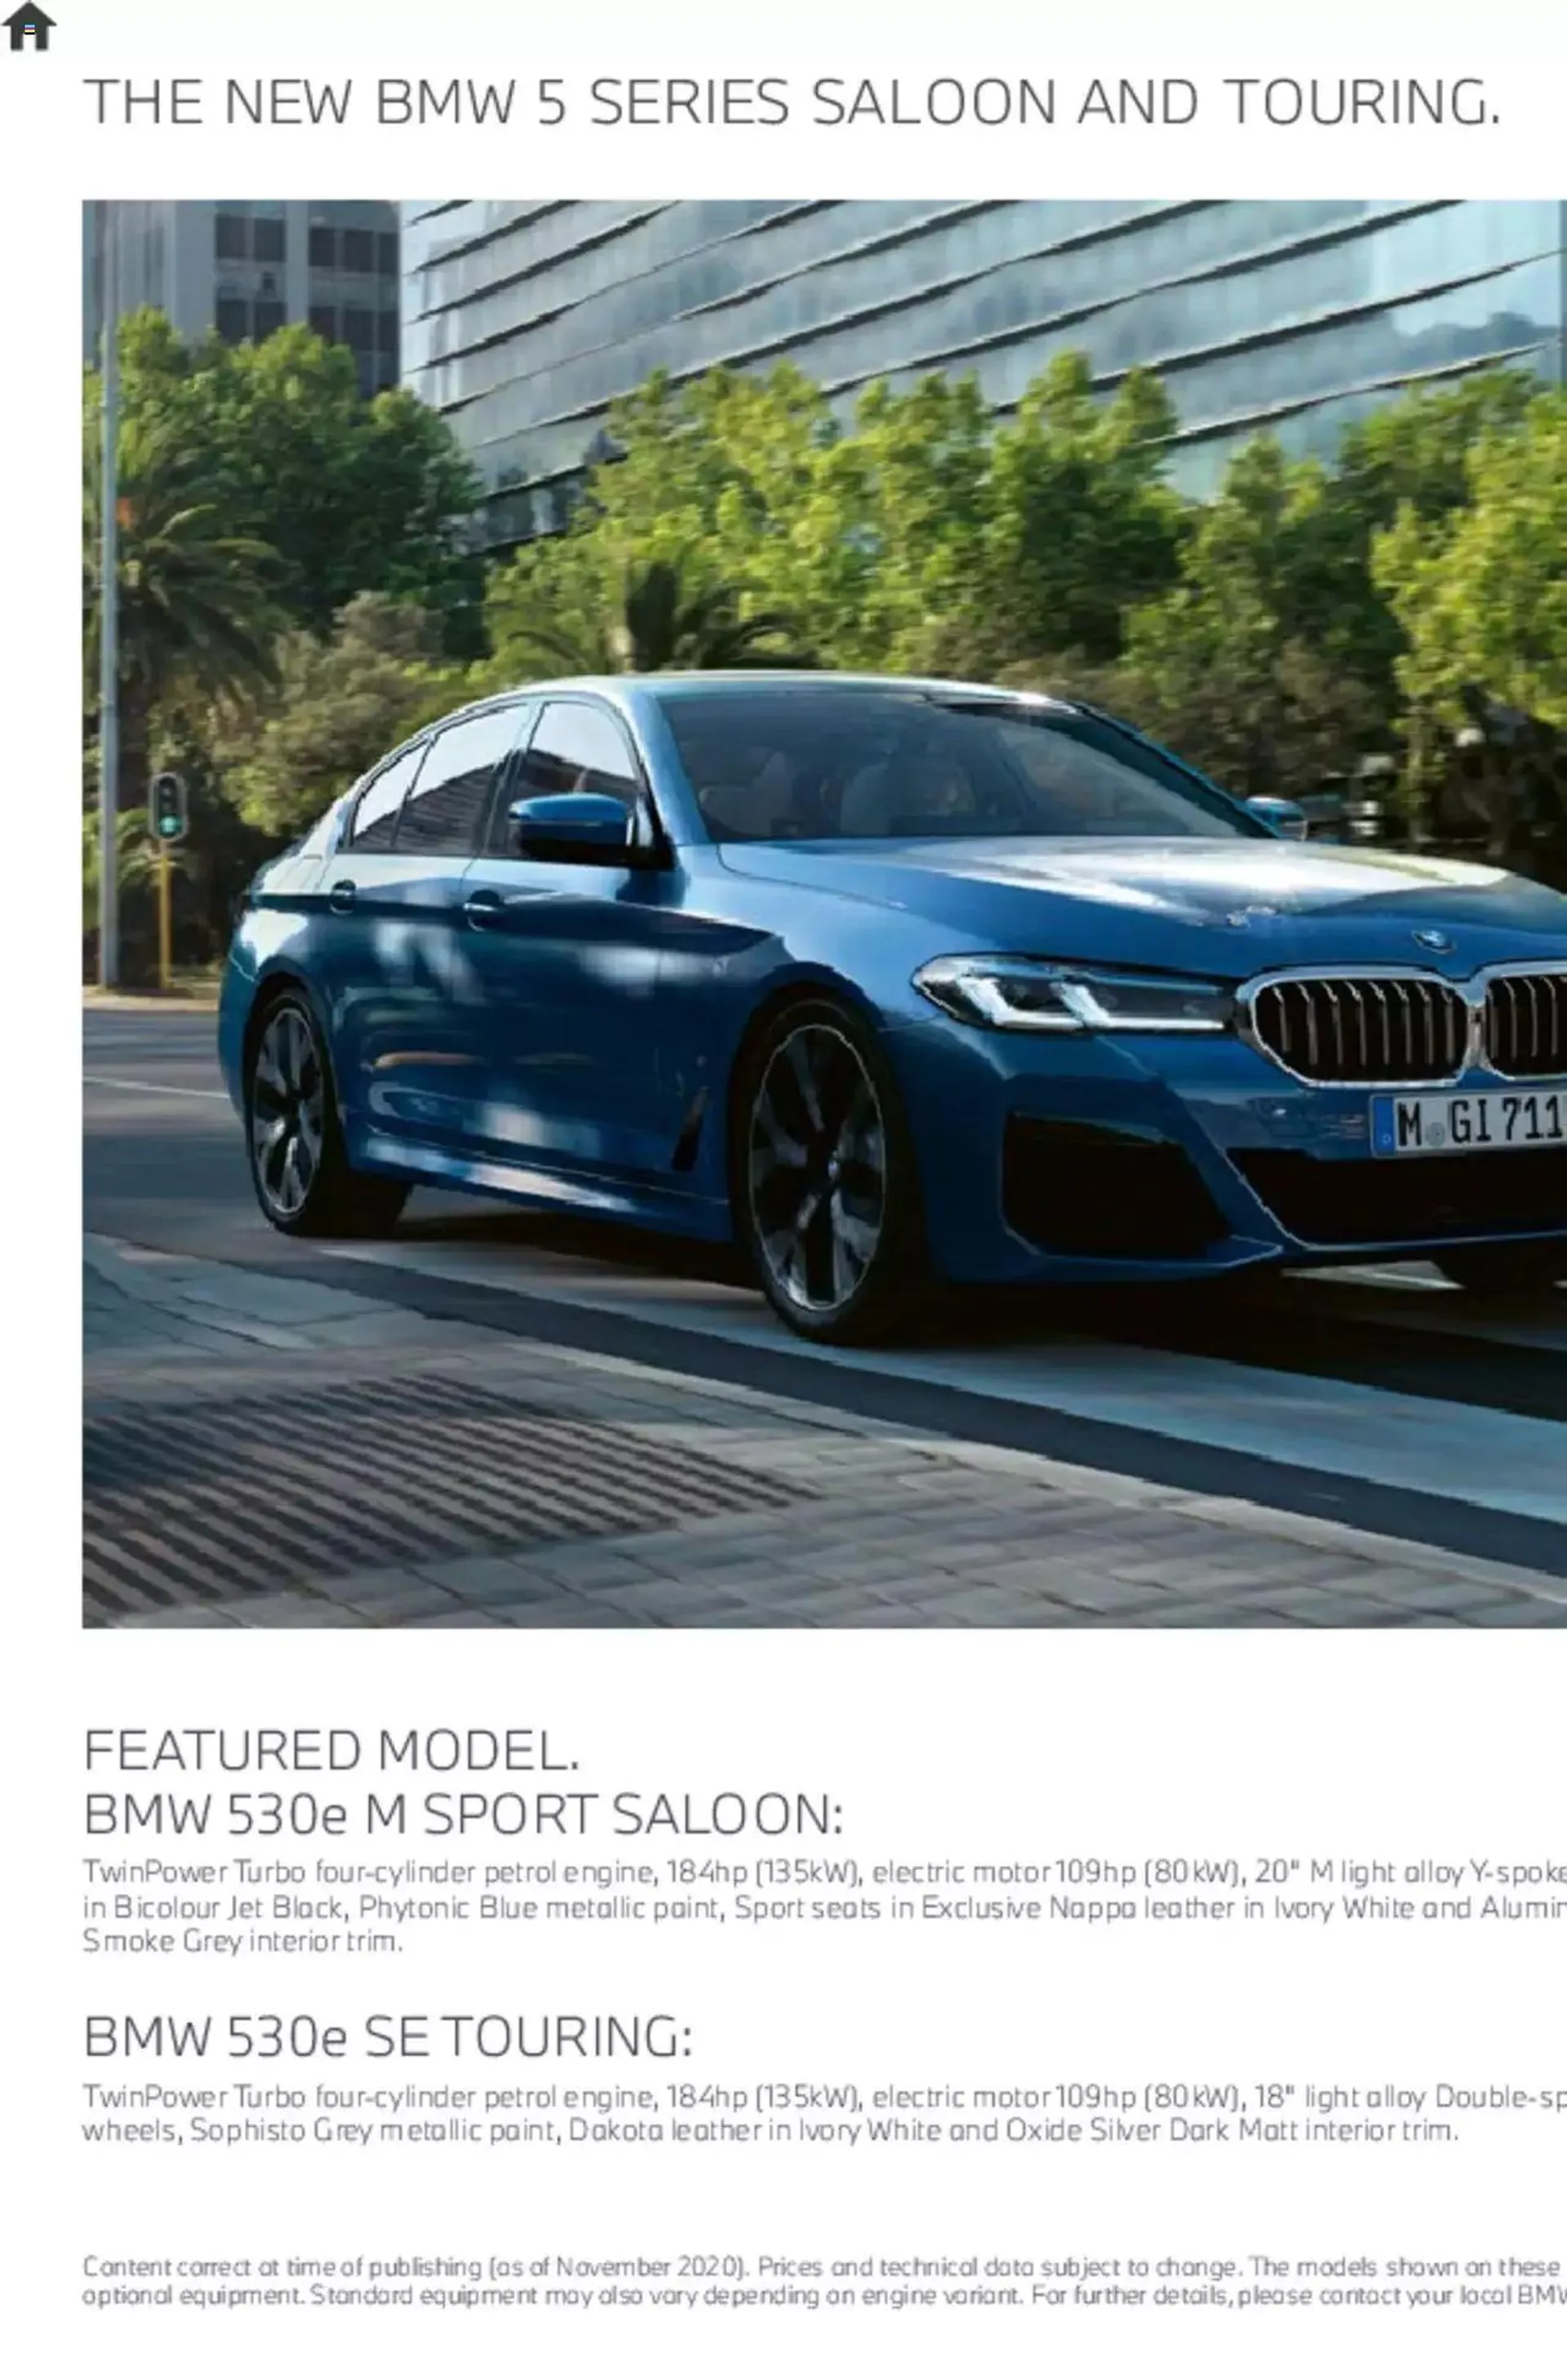 BMW - Saloon and Touring Brochure - 2